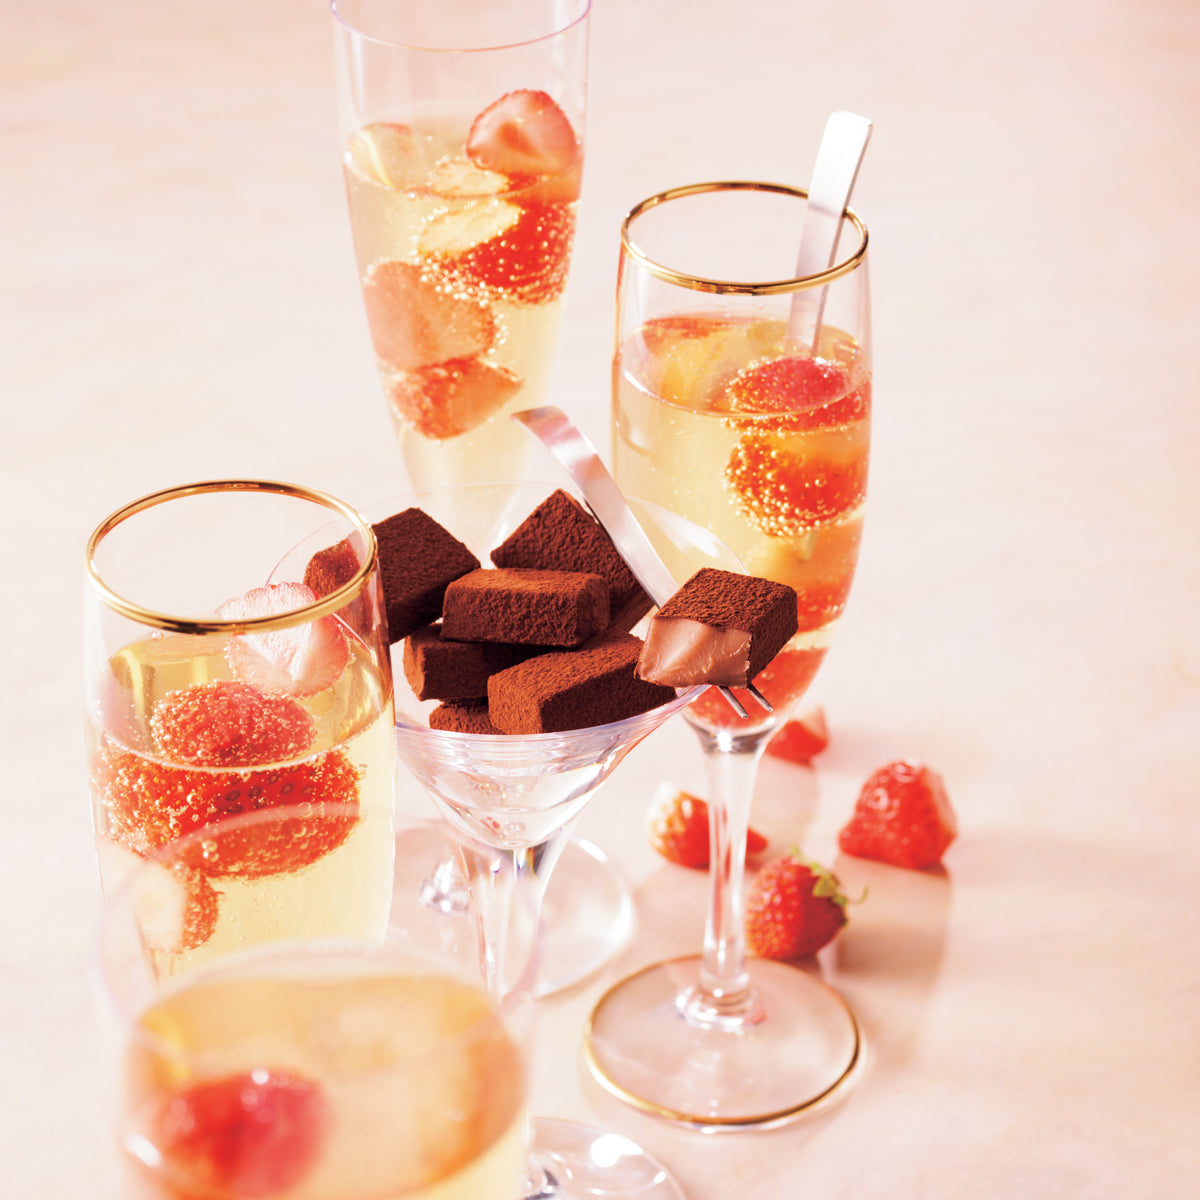 Image shows chocolate blocks on a clear cocktail glass with a light pink ribbon. Accents include champagne glasses filled with champagne and red strawberries. Other accents include red strawberries on the ground and silver cutlery used to hold a chocolate block and an extra inside a champagne glass. Background is in flesh color.